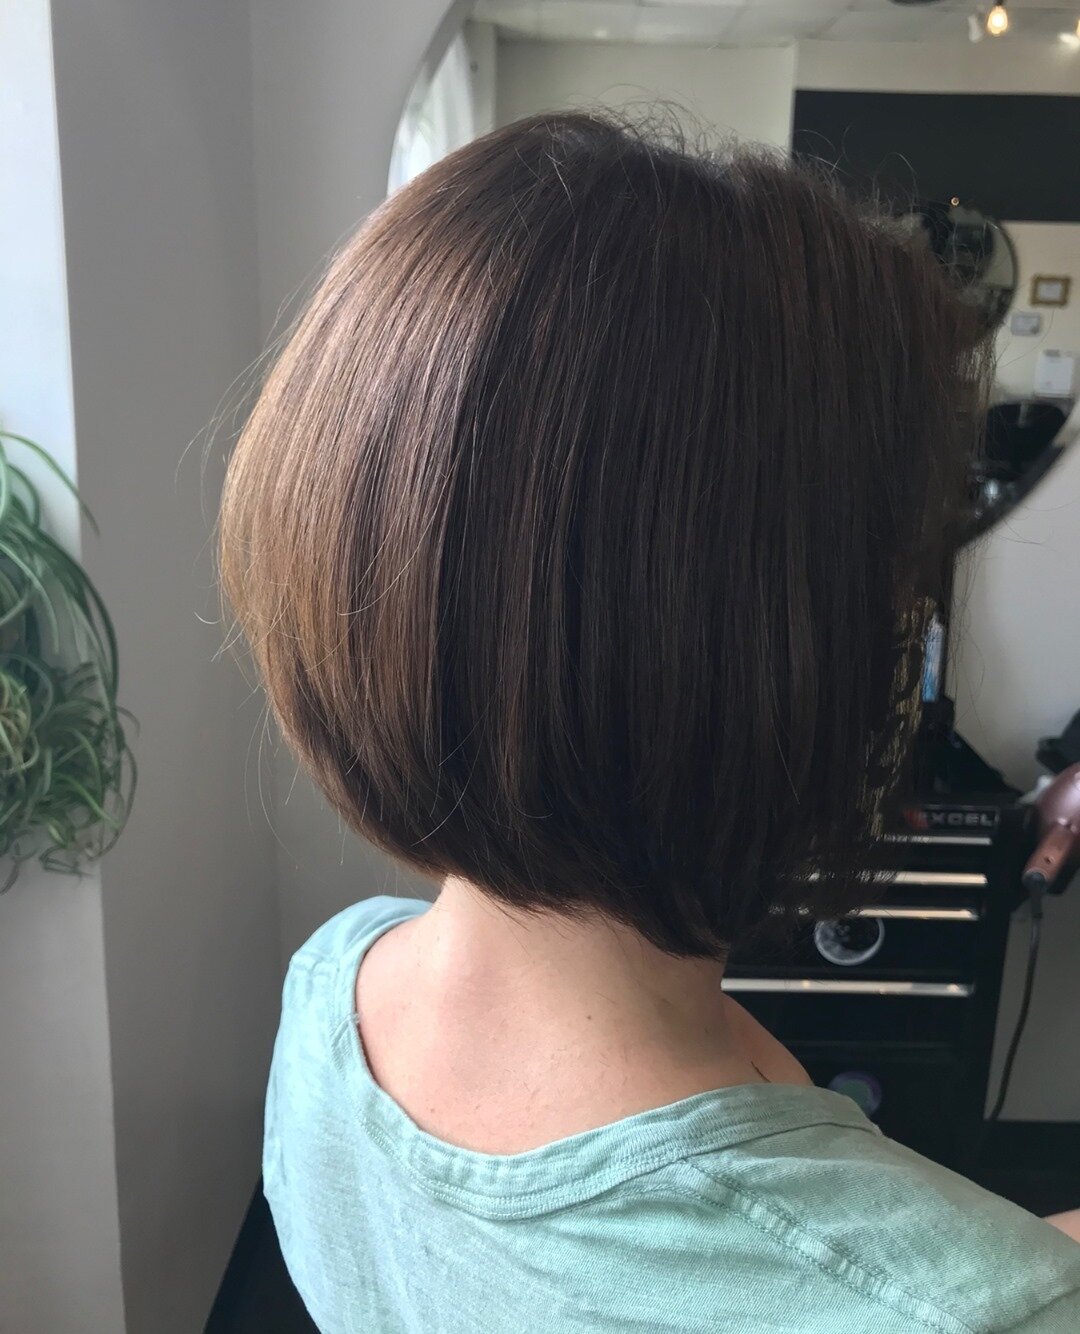 Cute classic bob for one of my long time clients.⁠
⁠
#bobsofinstagram #classicbobshape #kchairstylist #kccrossroadshair #lorealprofessional